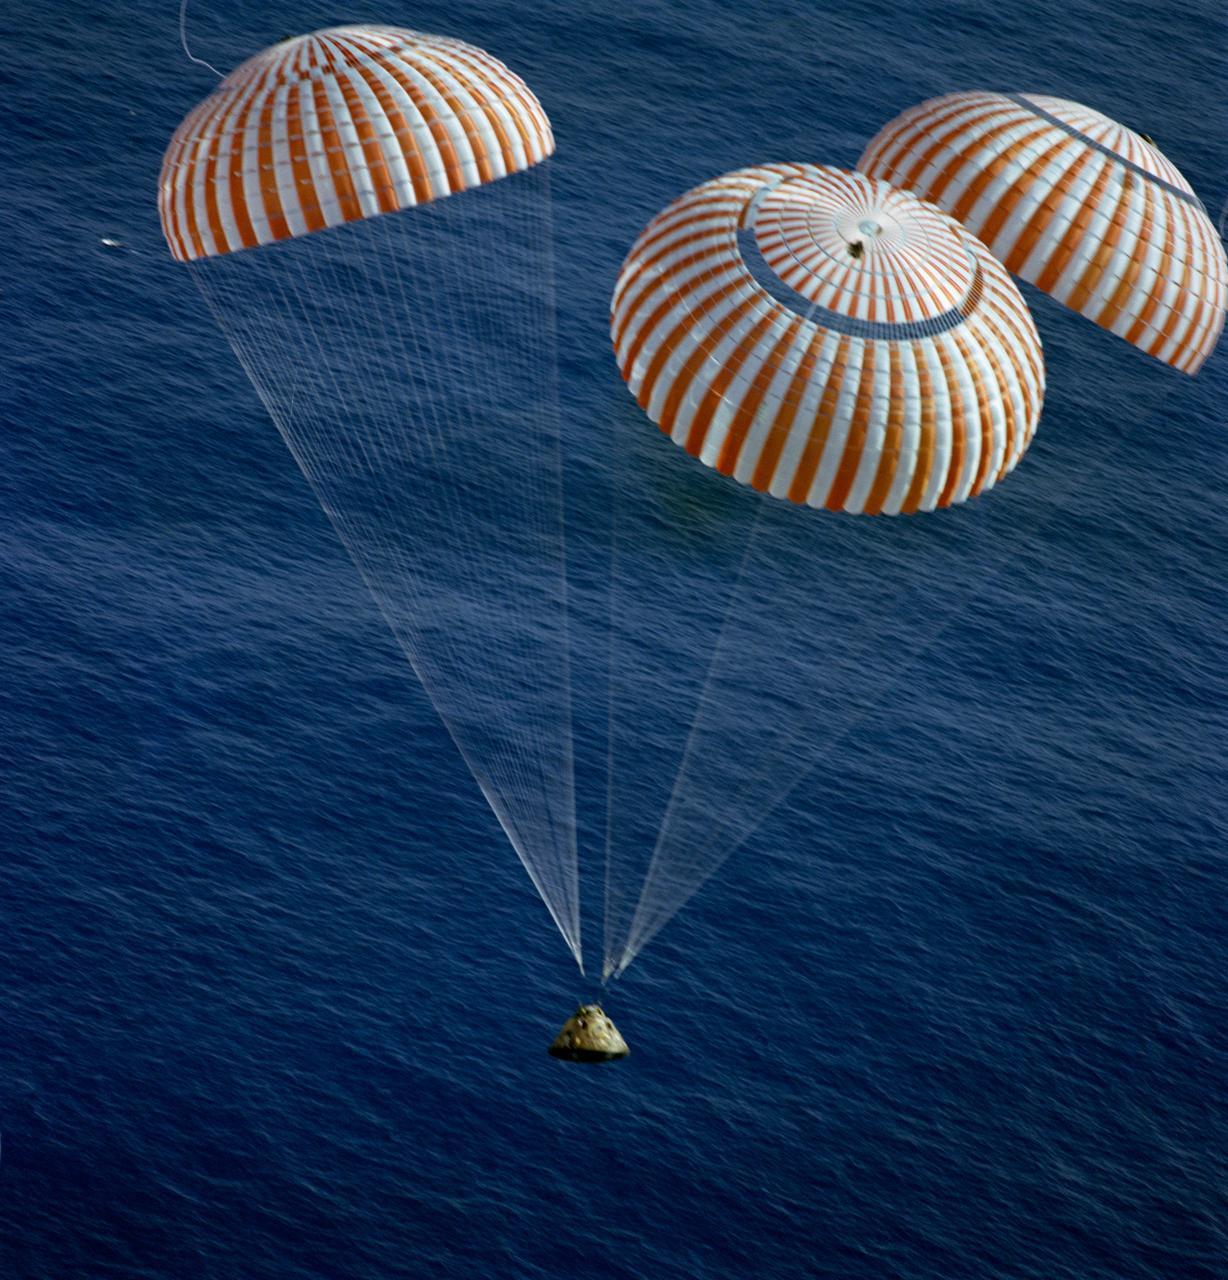 The Apollo 17 Command Module (CM), with astronauts Gene Cernan, Ron Evans and Harrison Schmitt aboard appears as a small conical spaceship.The capsule nears splashdown in the South Pacific Ocean with three enormous red-and-white striped parachutes. This overhead view was taken from a recovery aircraft seconds before the spacecraft hit the blue water. Later, the three crewmen were picked up by a helicopter from the prime recovery ship, USS Ticonderoga. Credit: NASA